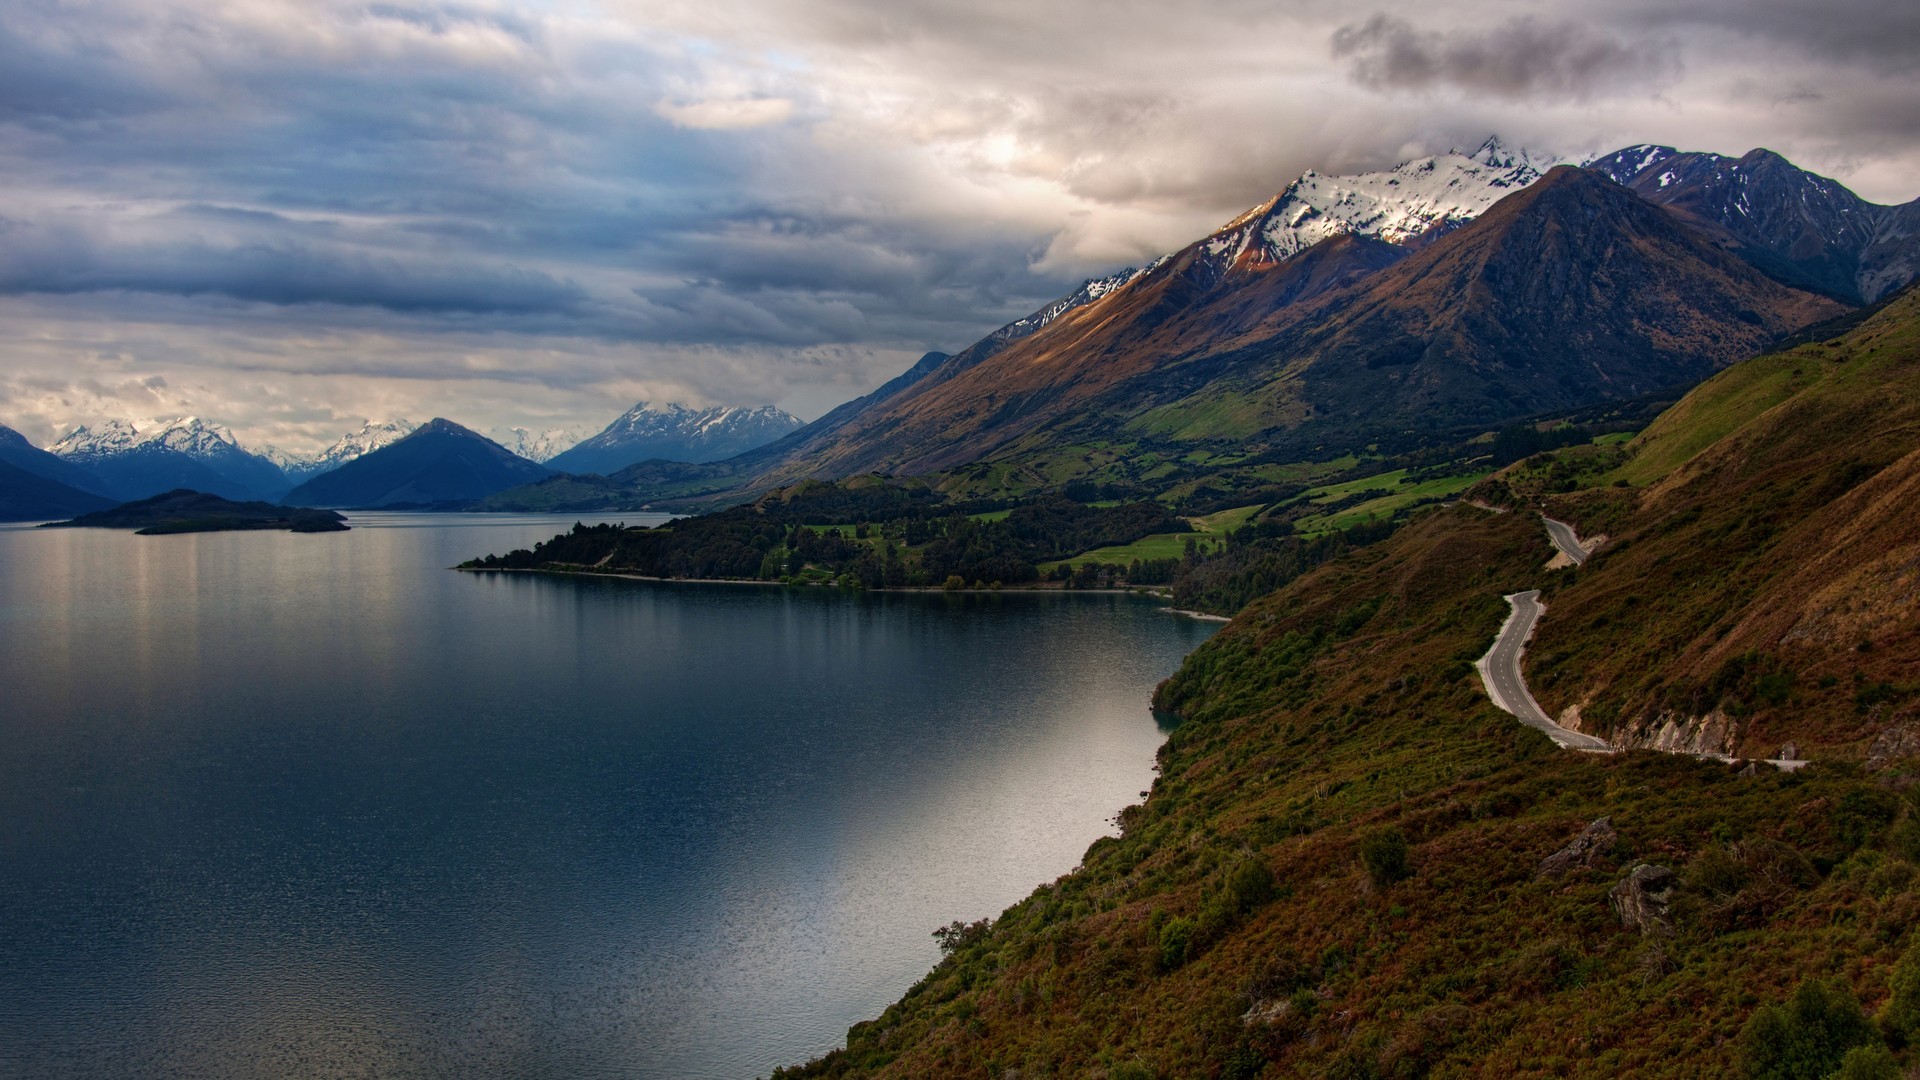 General 1920x1080 landscape nature mountains water road clouds New Zealand snowy peak